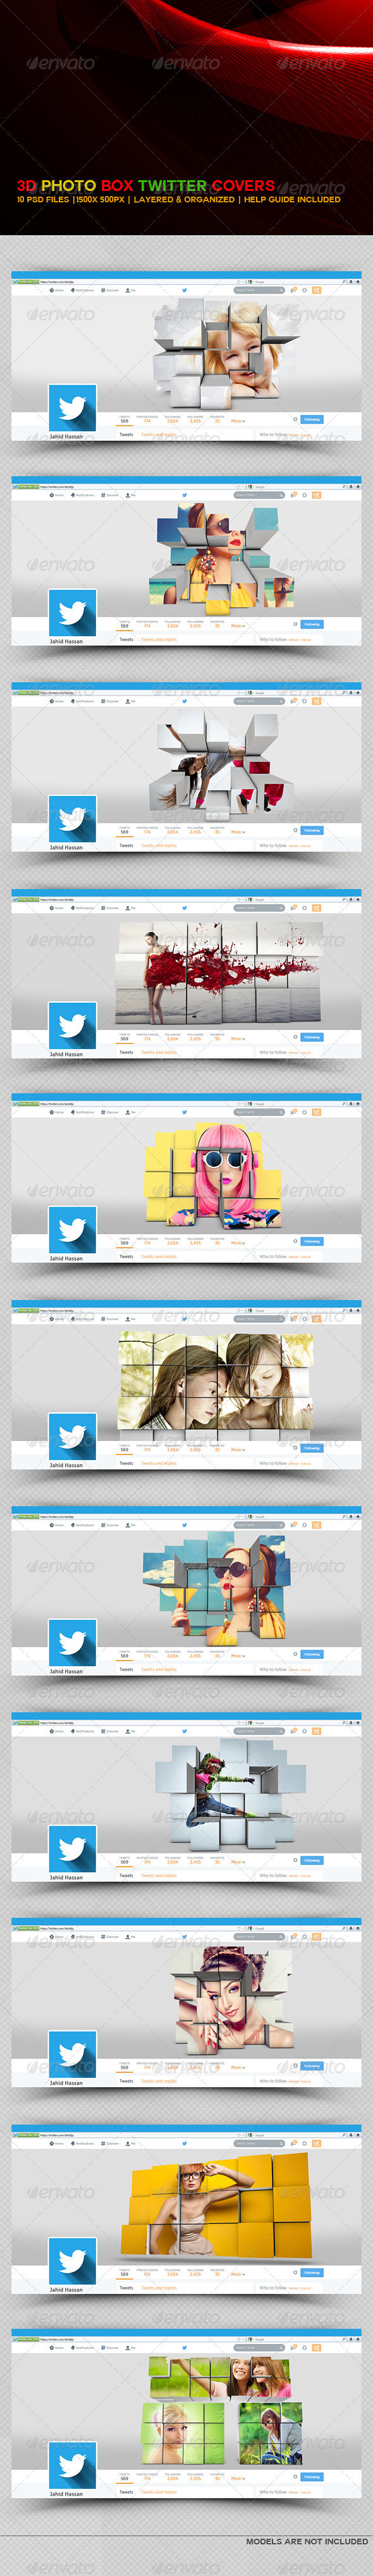 3d 20pphoto 20box 20twitter 20covers 20preview